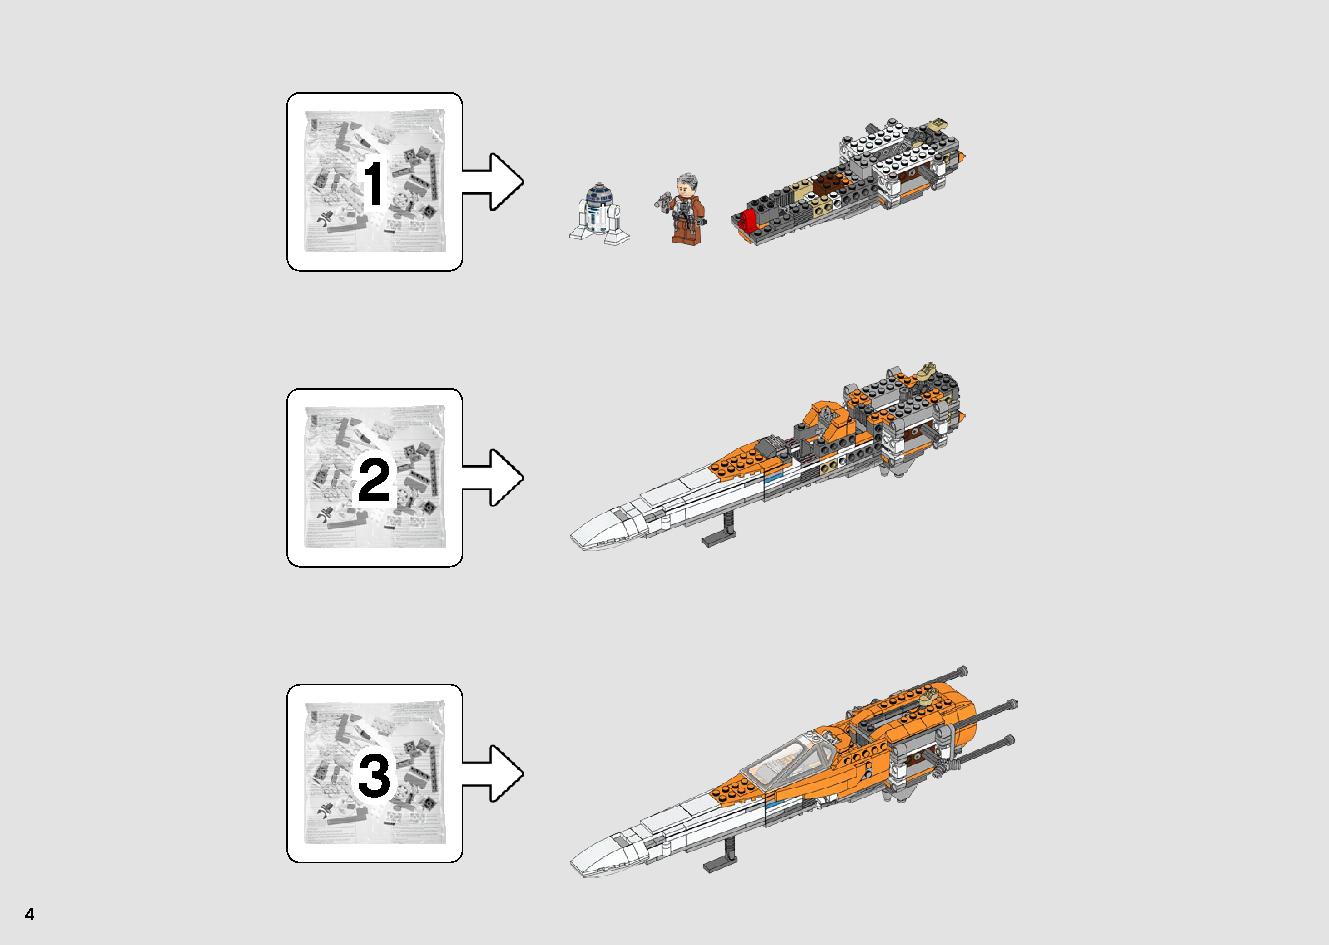 Poe Dameron's X-wing Fighter 75273 LEGO information LEGO instructions 4 page